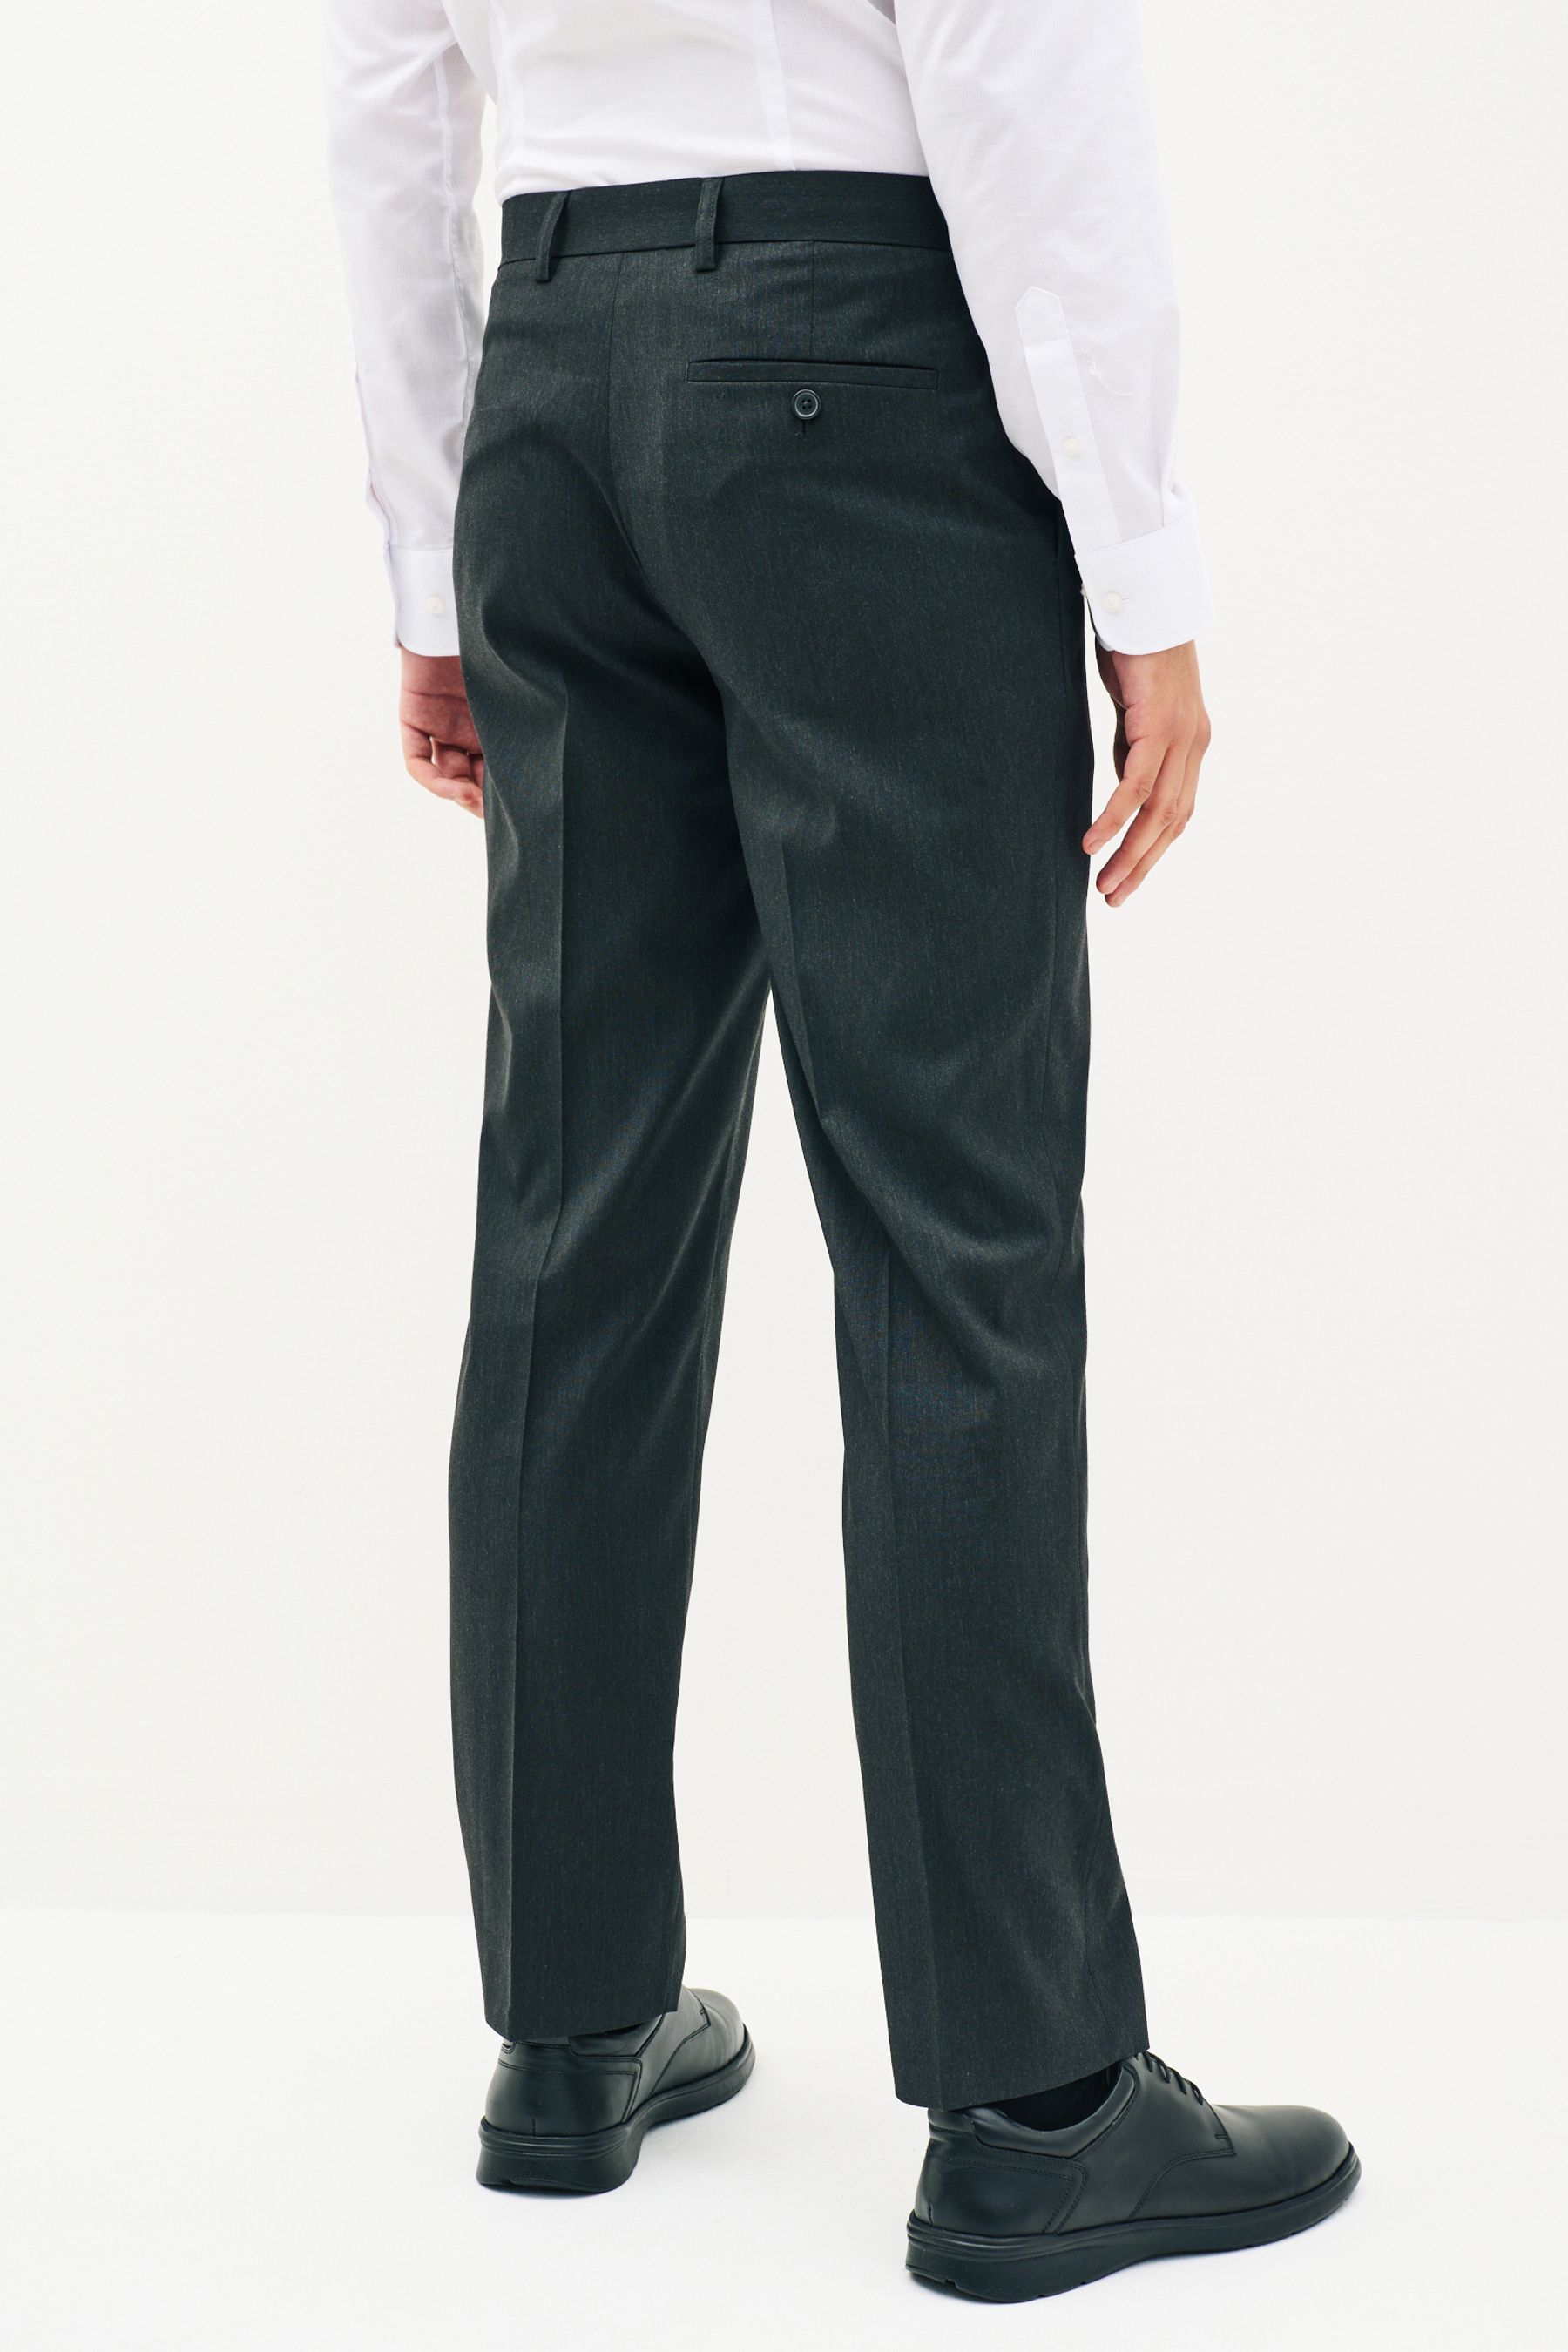 Buy Charcoal Grey Tailored Stretch Smart Trousers from the Next UK ...